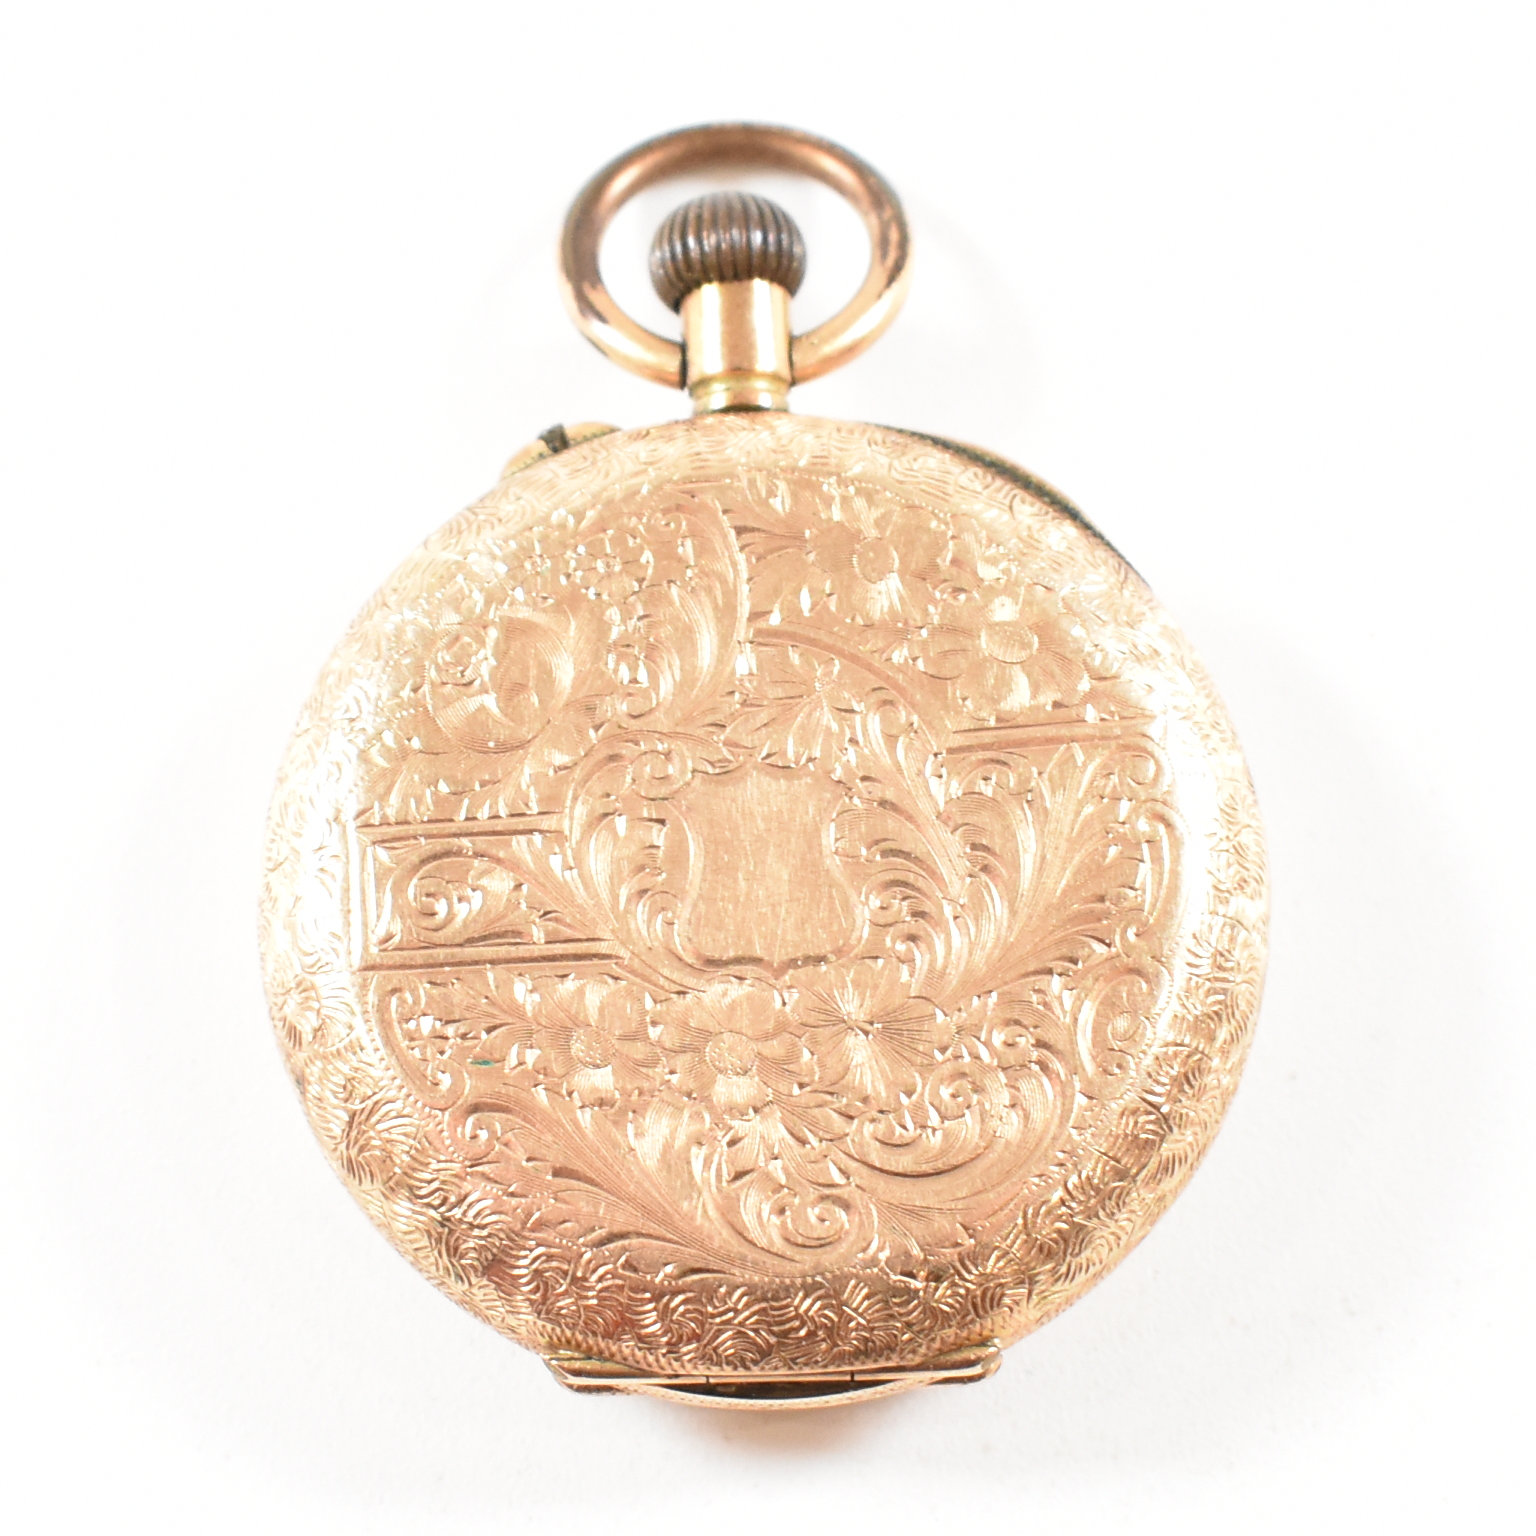 14CT GOLD OPEN FACED CROWN WIND POCKET FOB WATCH - Image 8 of 8